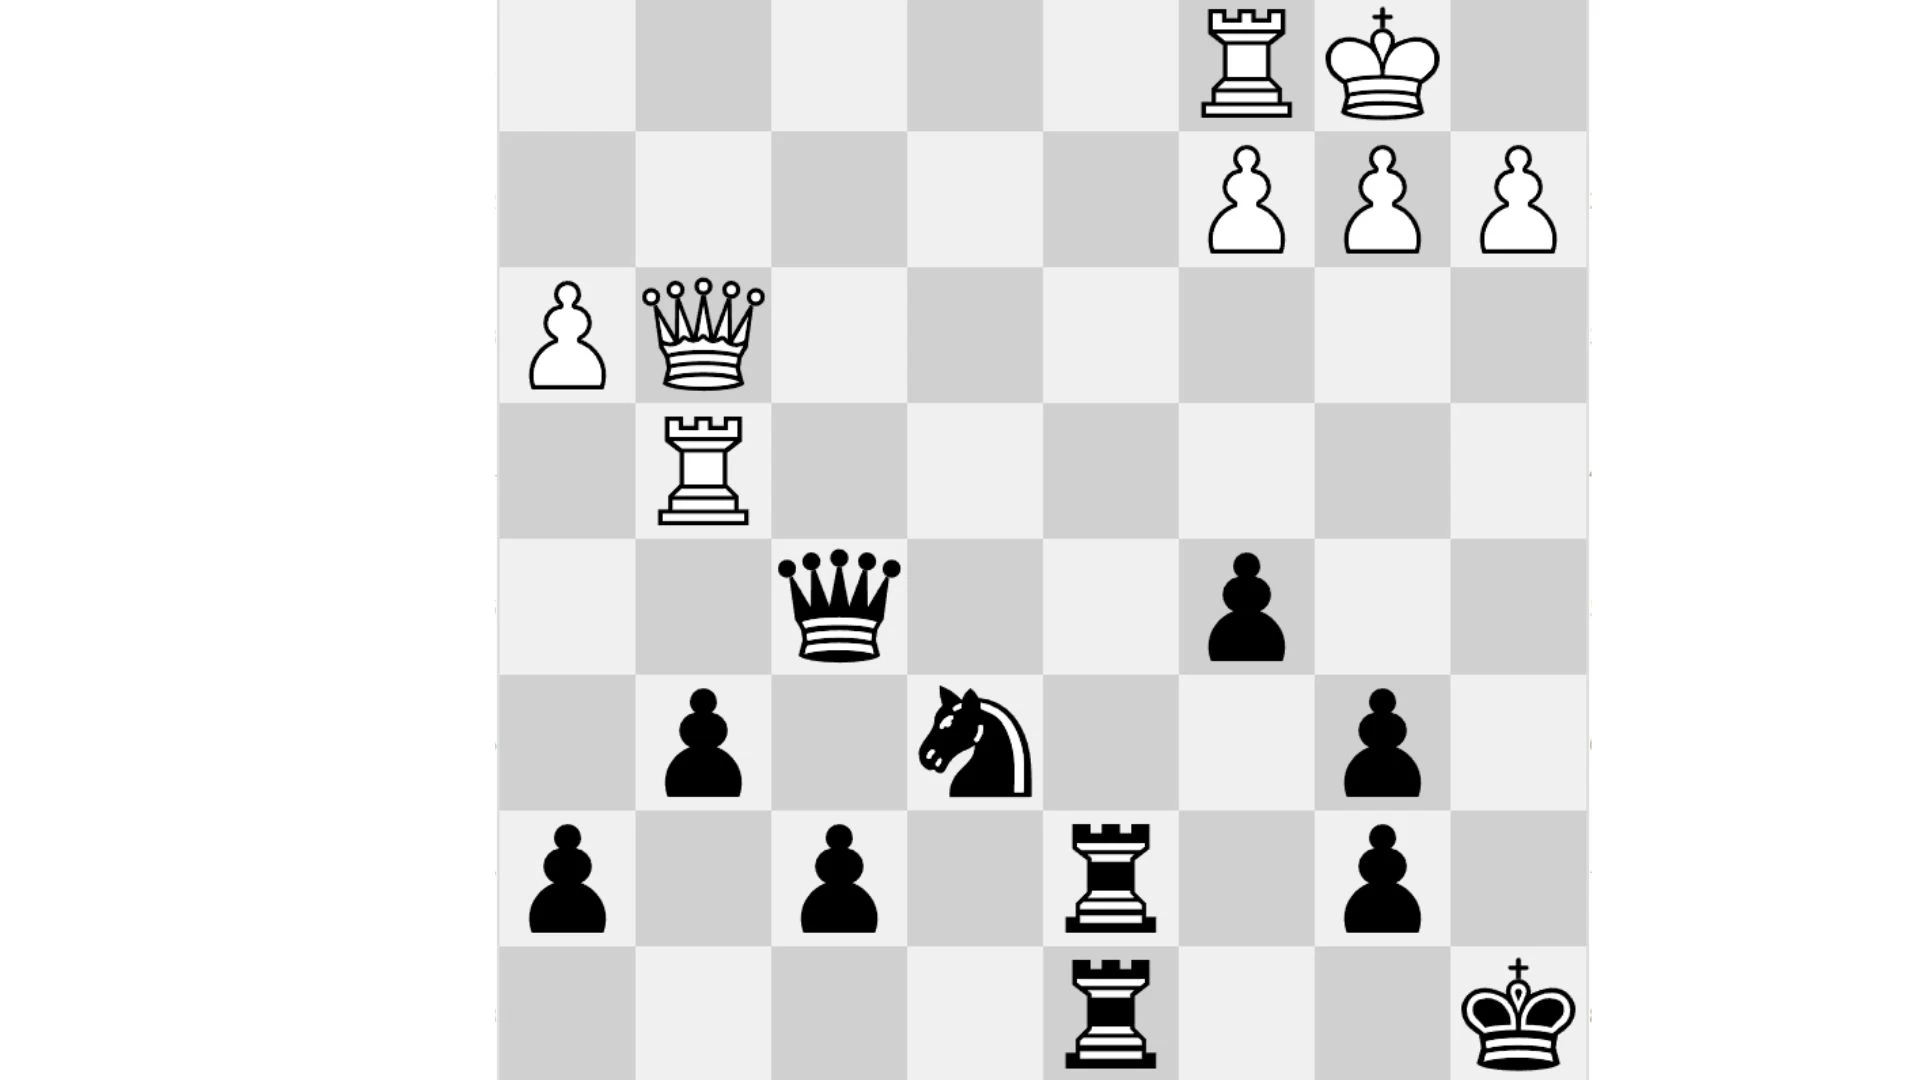 Can You Solve This Chess Puzzle in Only One Move?